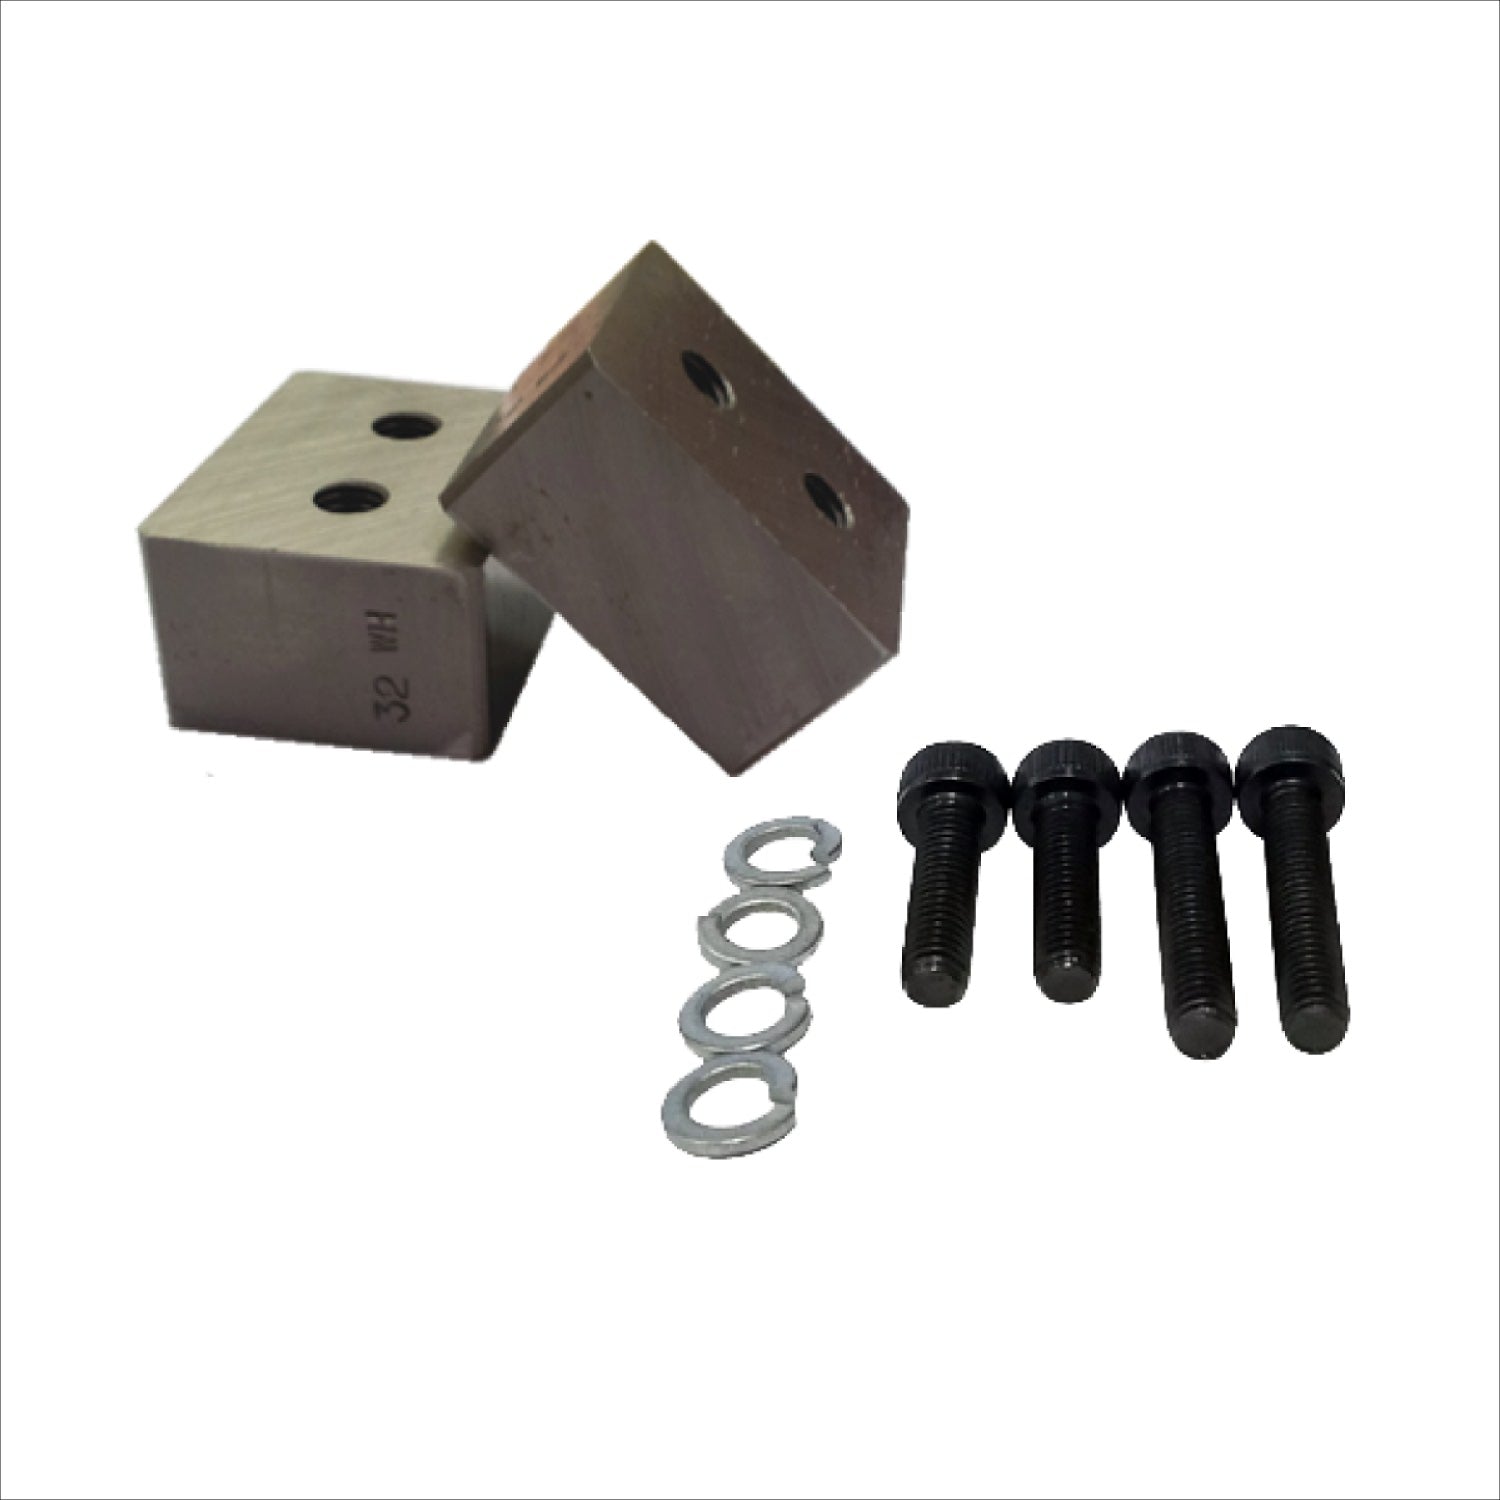 RB-32WH Replacement Cutting Blocks for DC-32WH #10 Rebar Cutter